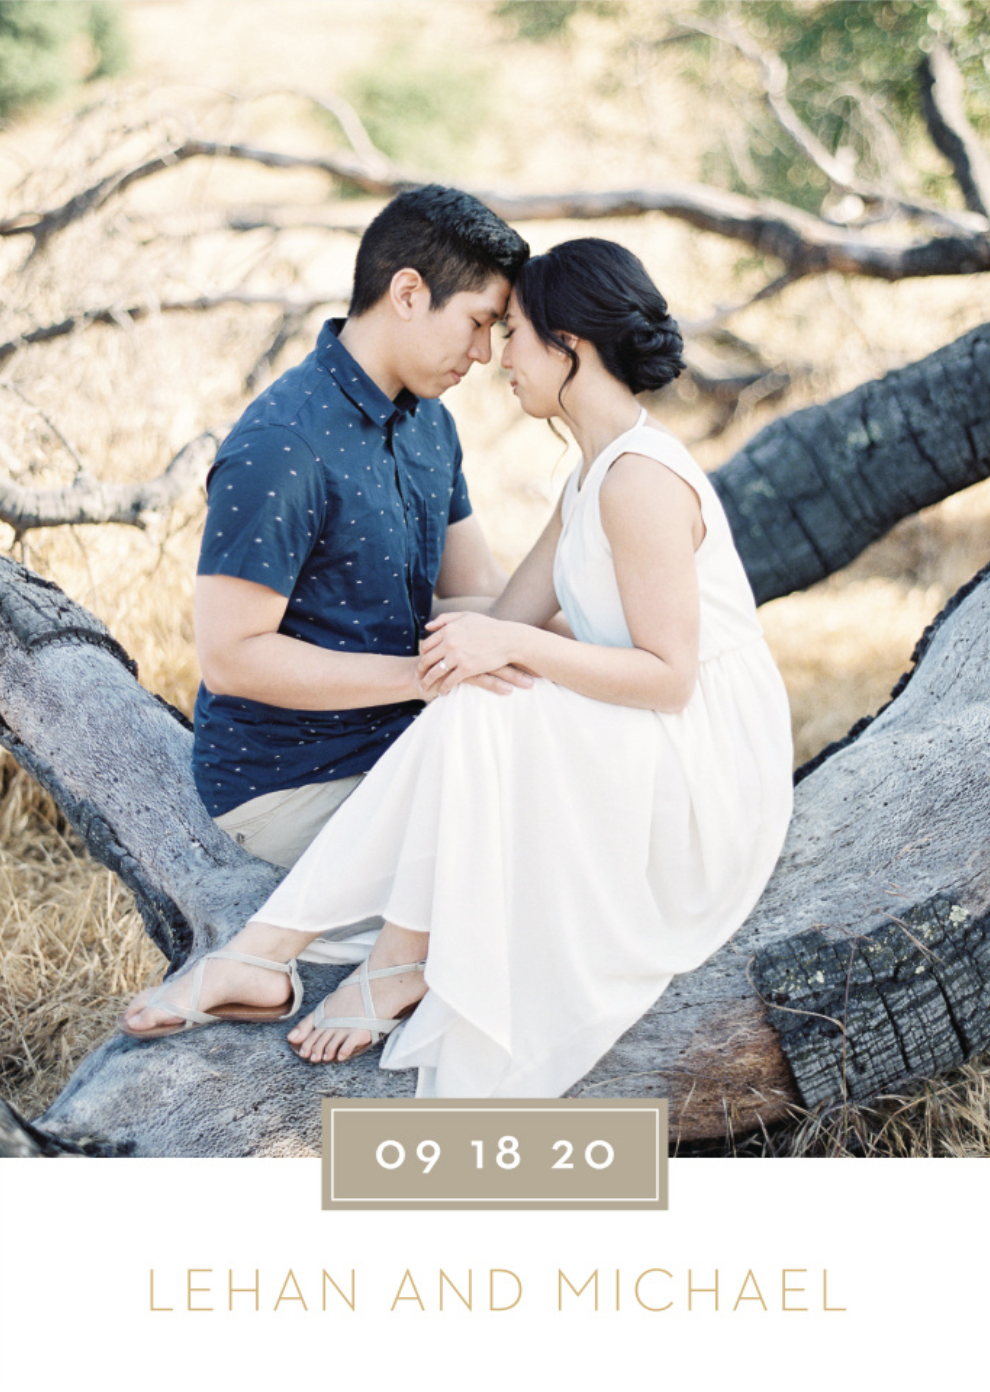 36 Creative And Unique Save The Date Ideas | Save the date pictures, Unique save  the dates, Save the date photos